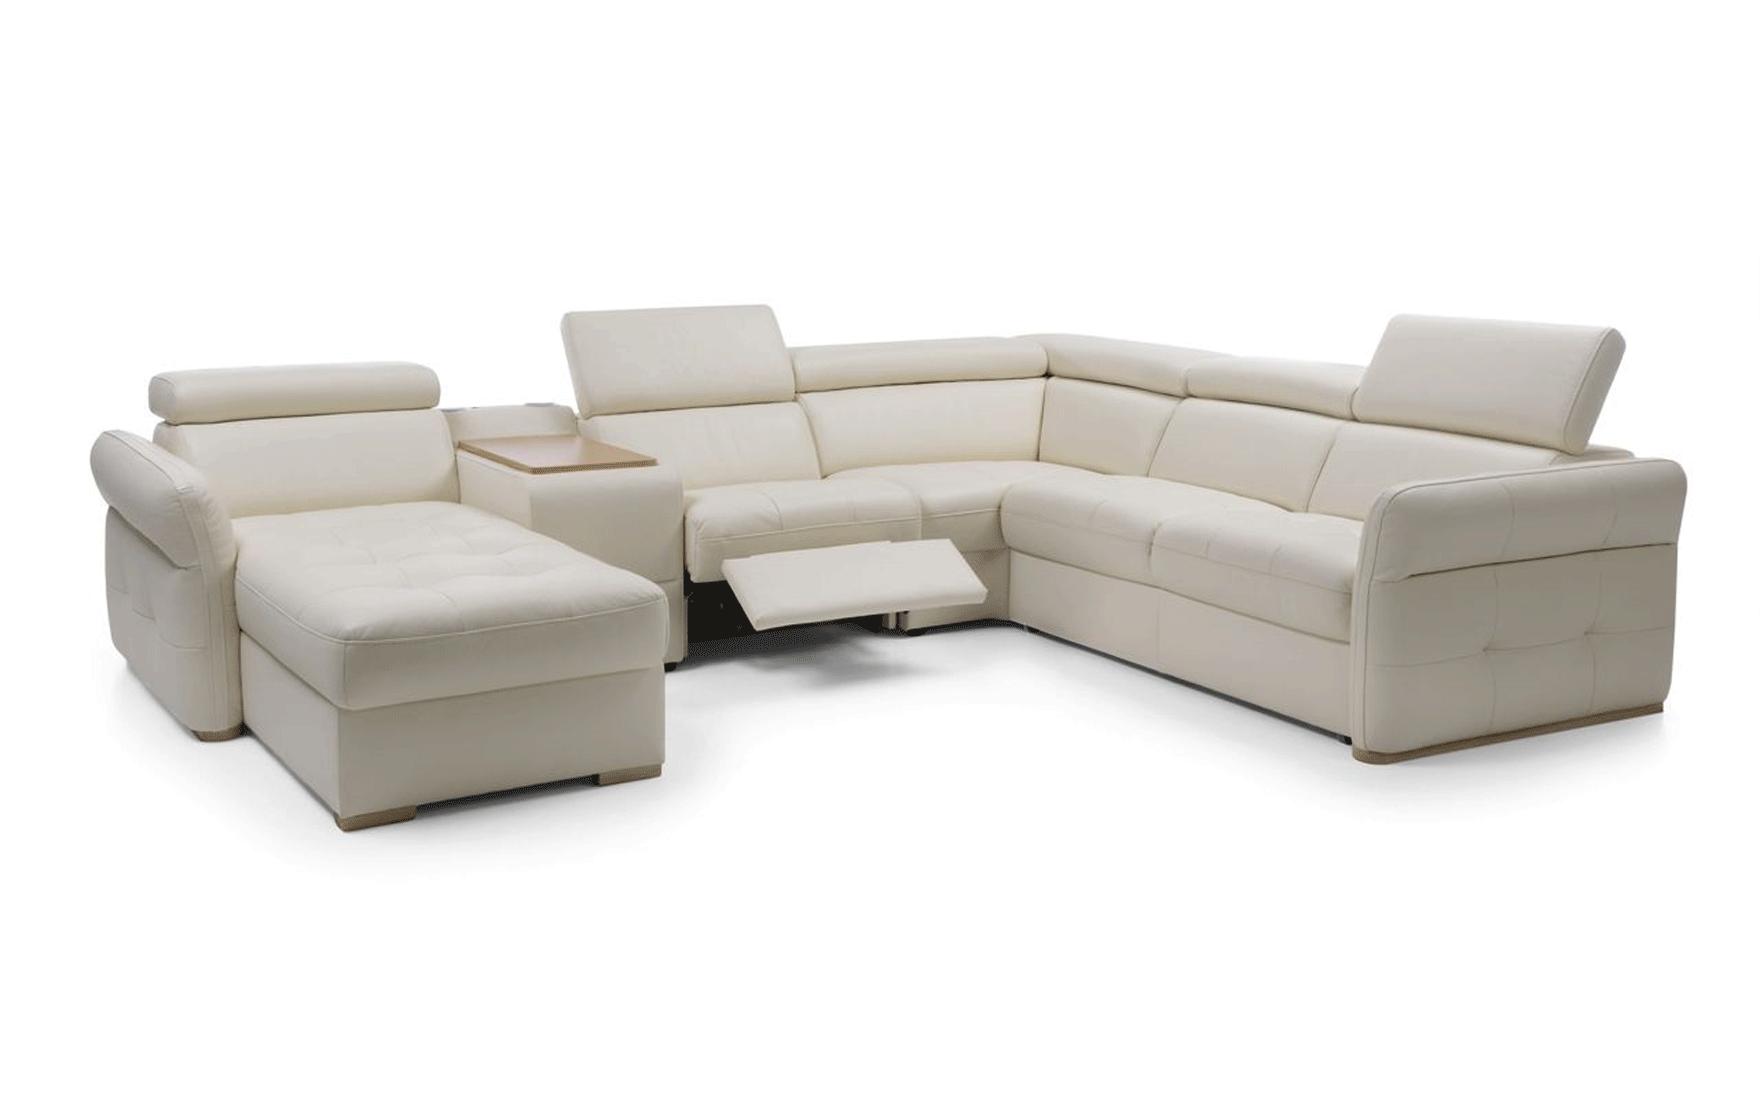 Modern Sectional Sofa Bed Massimo MASSIMO-SEC in Beige Leather